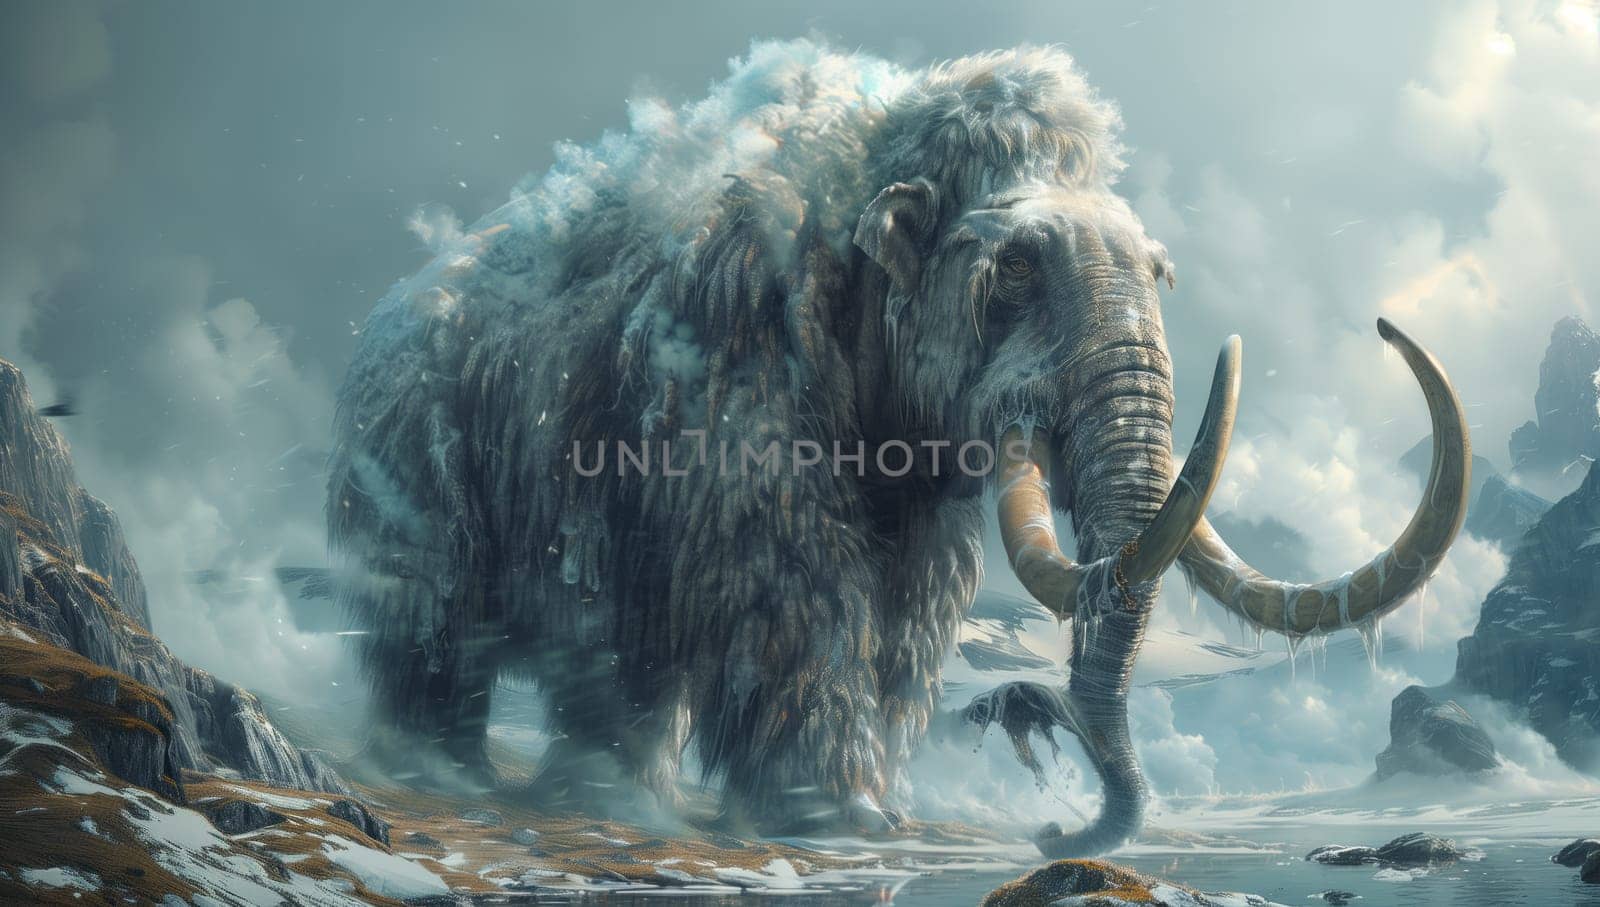 A mythical creature resembling a mammoth roams through a snowy forest, creating a stunning landscape against the backdrop of dark clouds